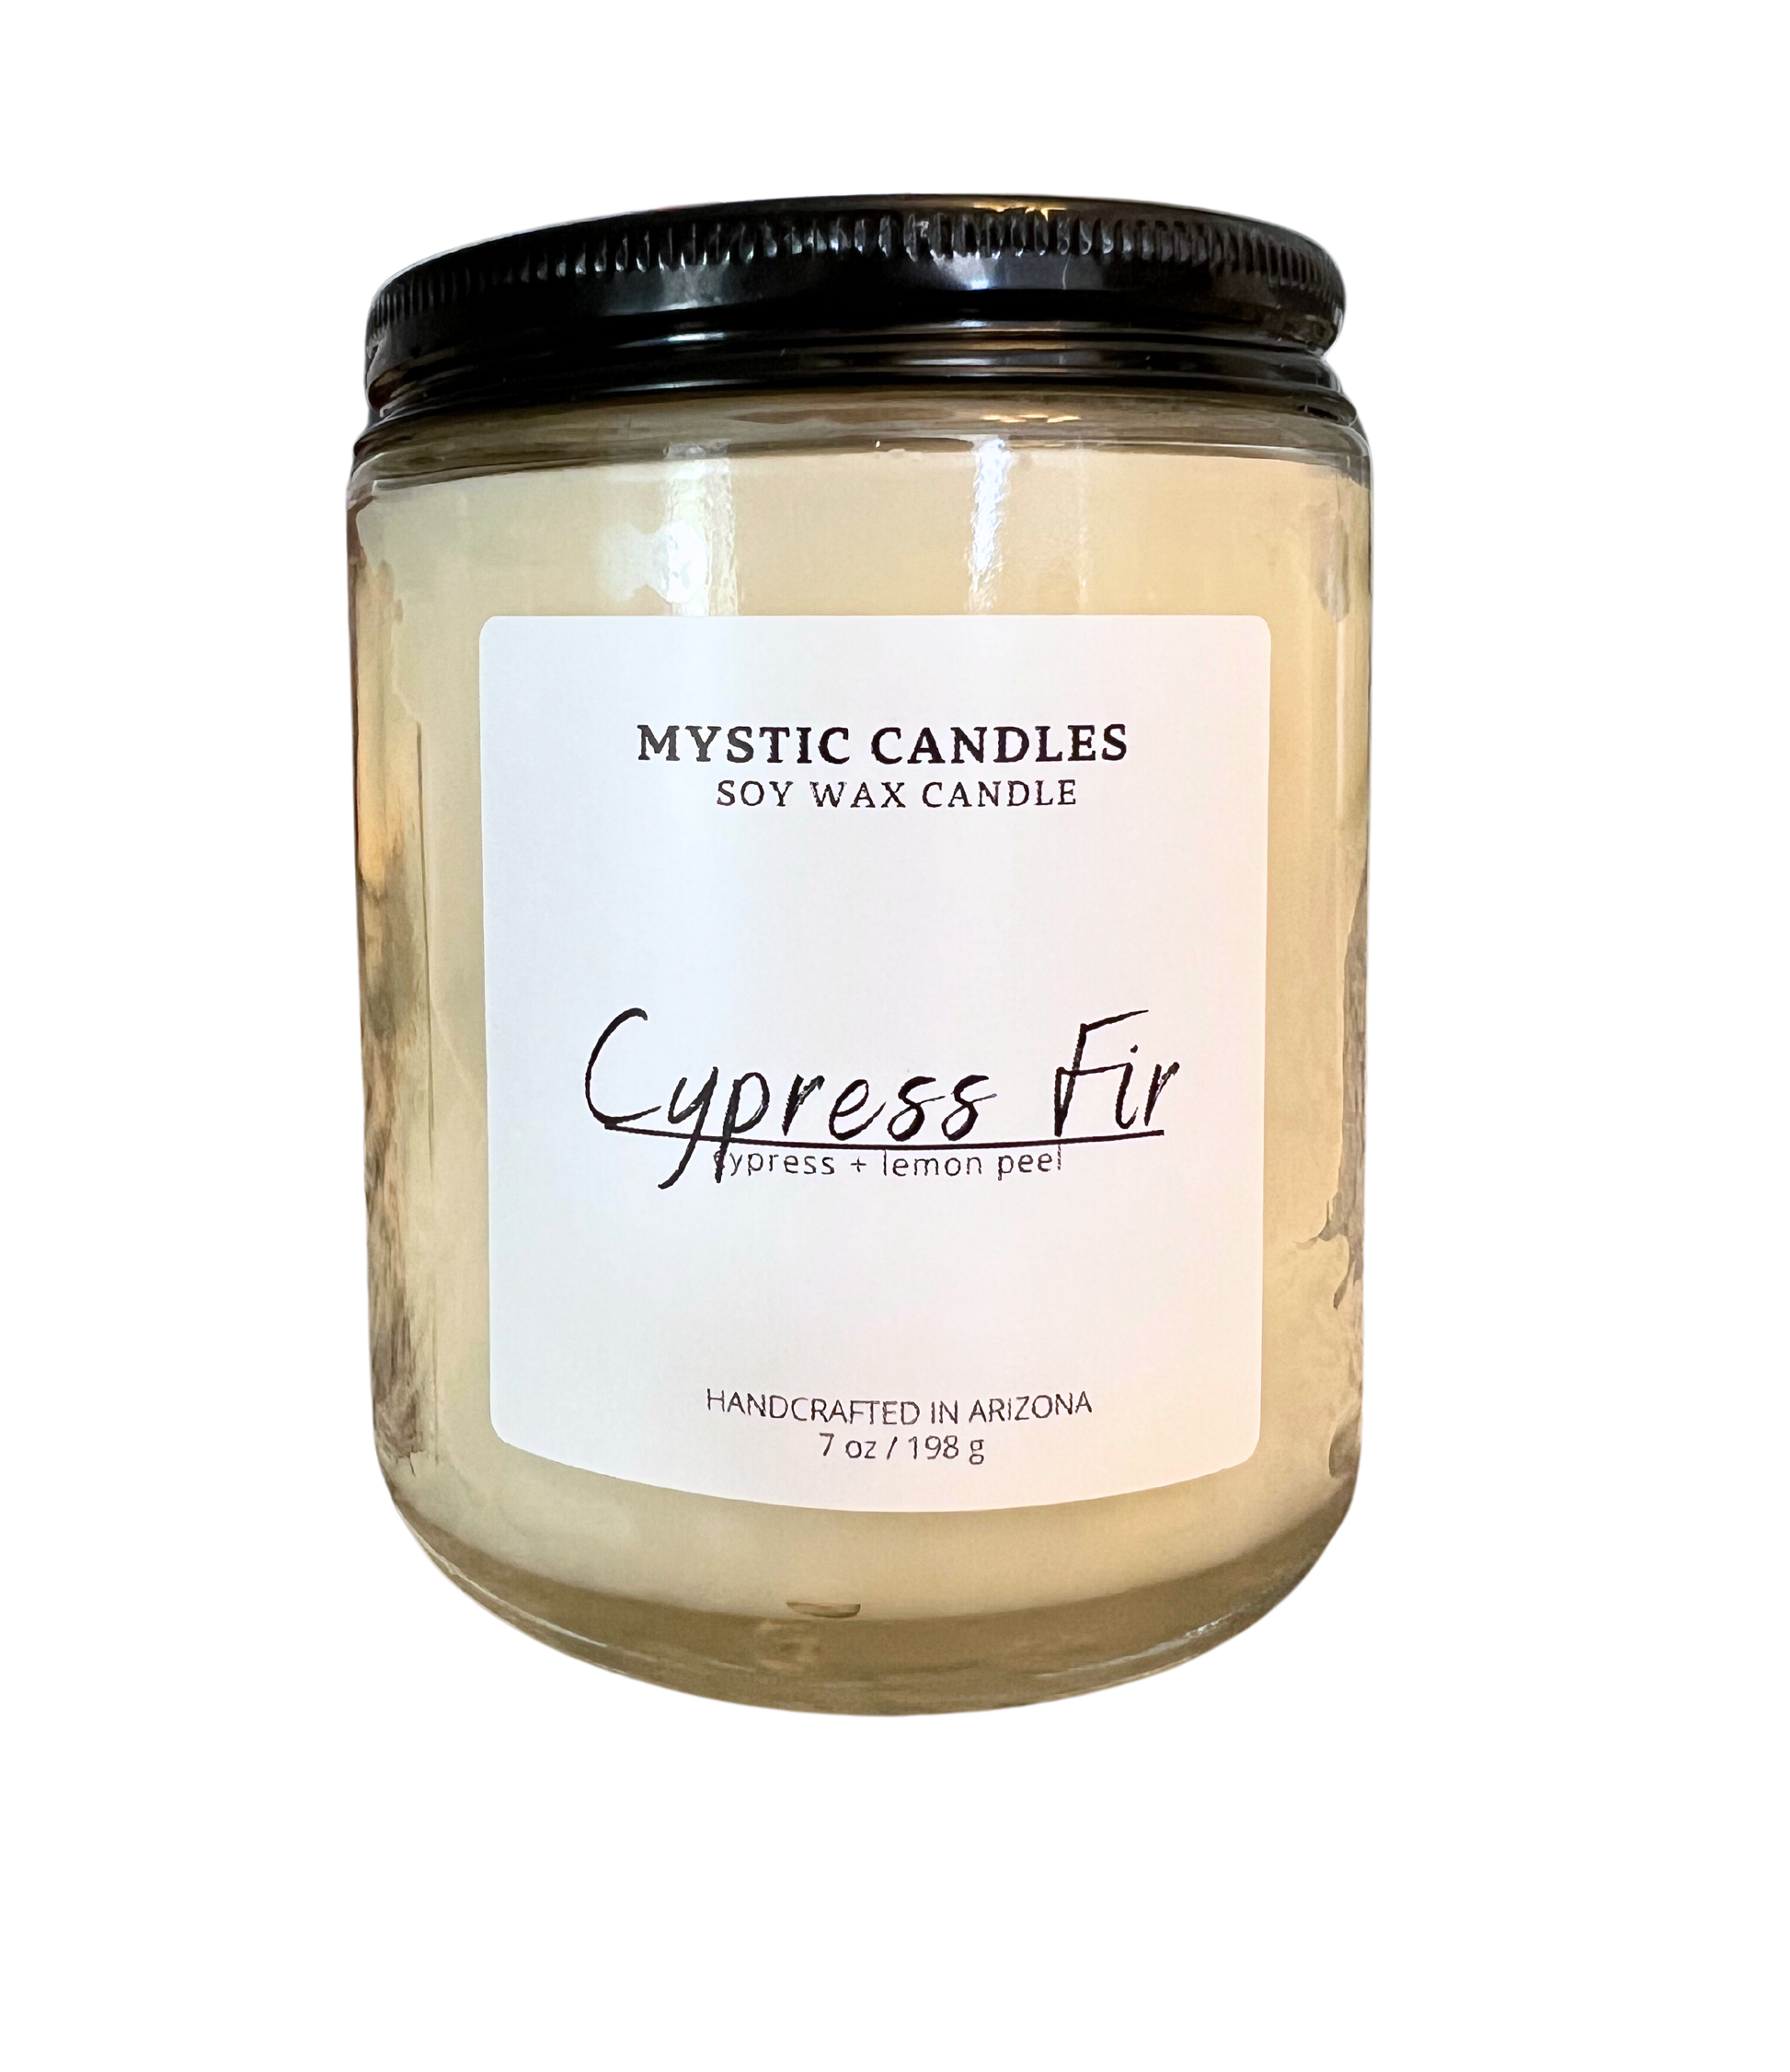 Cypress Fir Candle - Mystic Candles and Soaps LLC